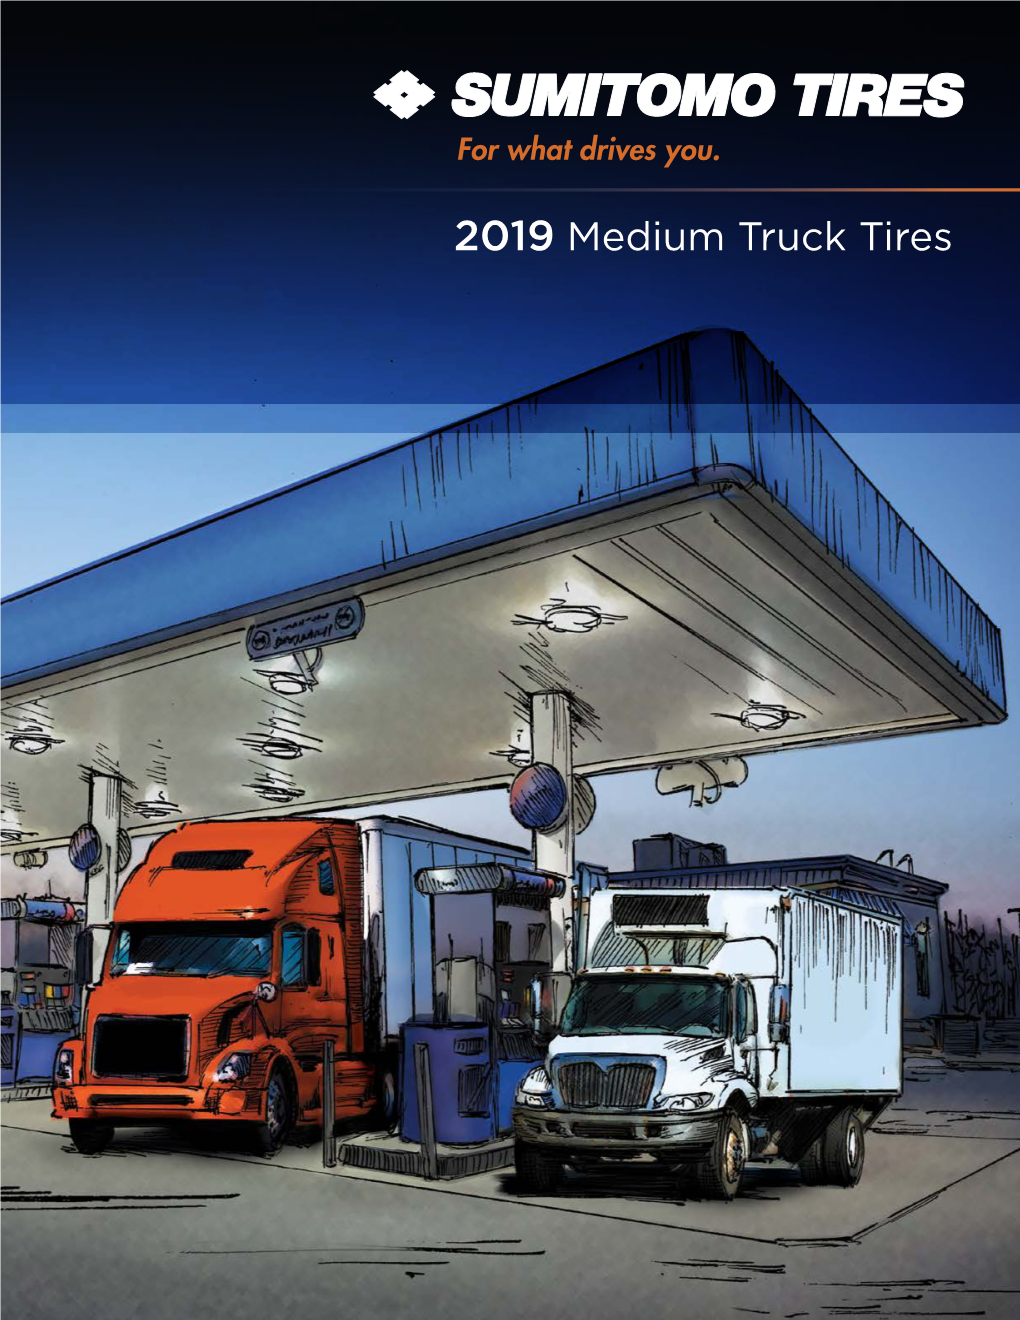 2019 Medium Truck Tires for What Drives You